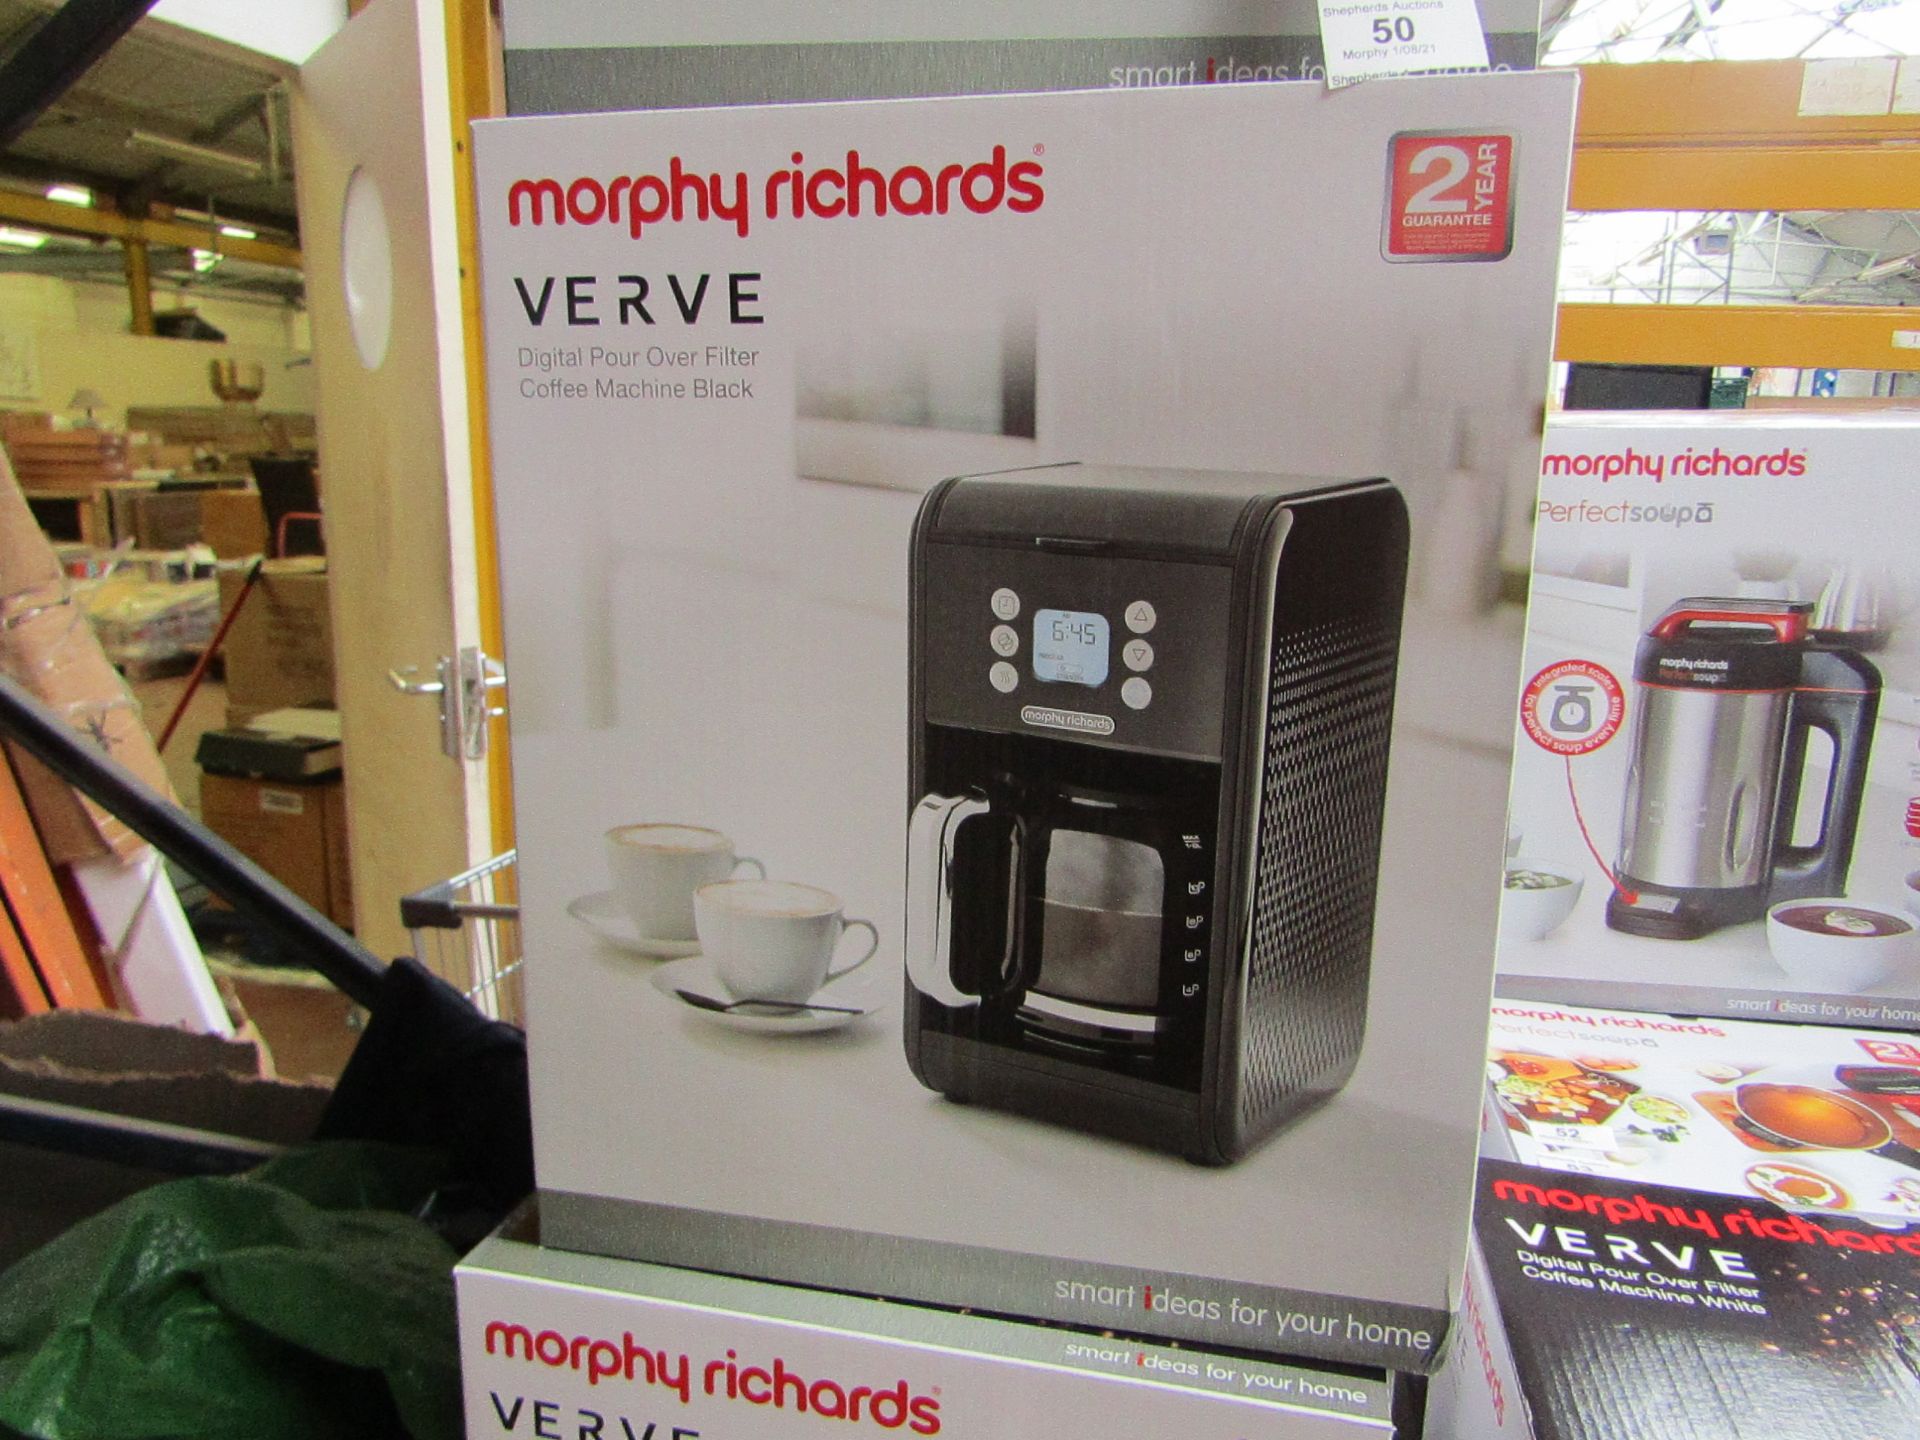 Morphy Richards Verve digital pour over filter coffee machine in black, brand new and boxed. RRP £